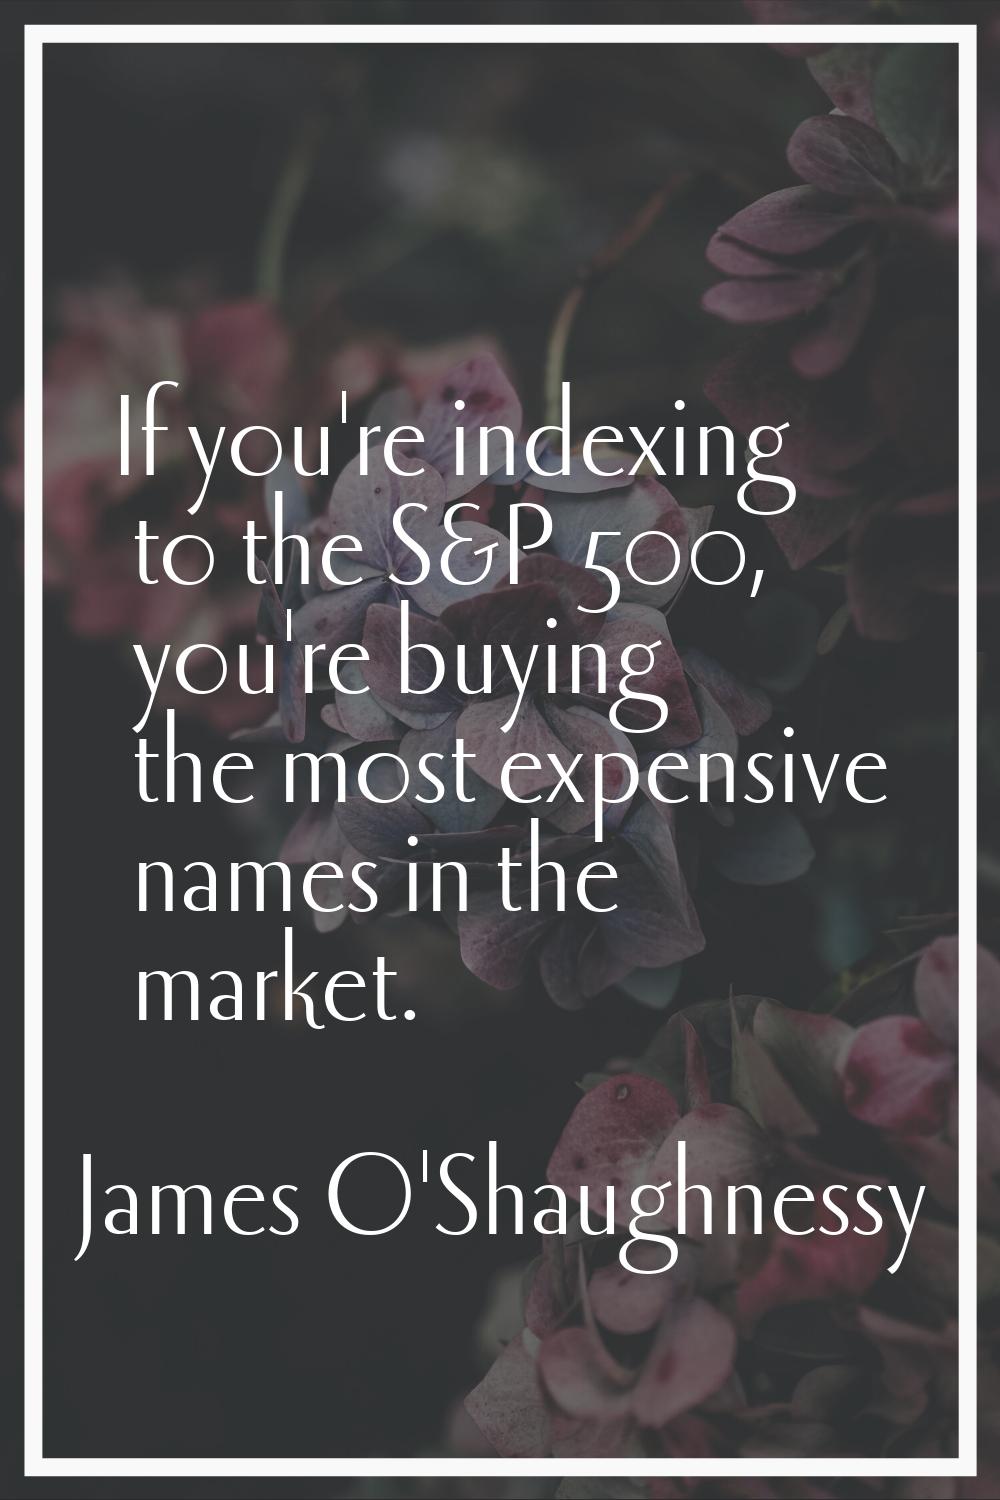 If you're indexing to the S&P 500, you're buying the most expensive names in the market.